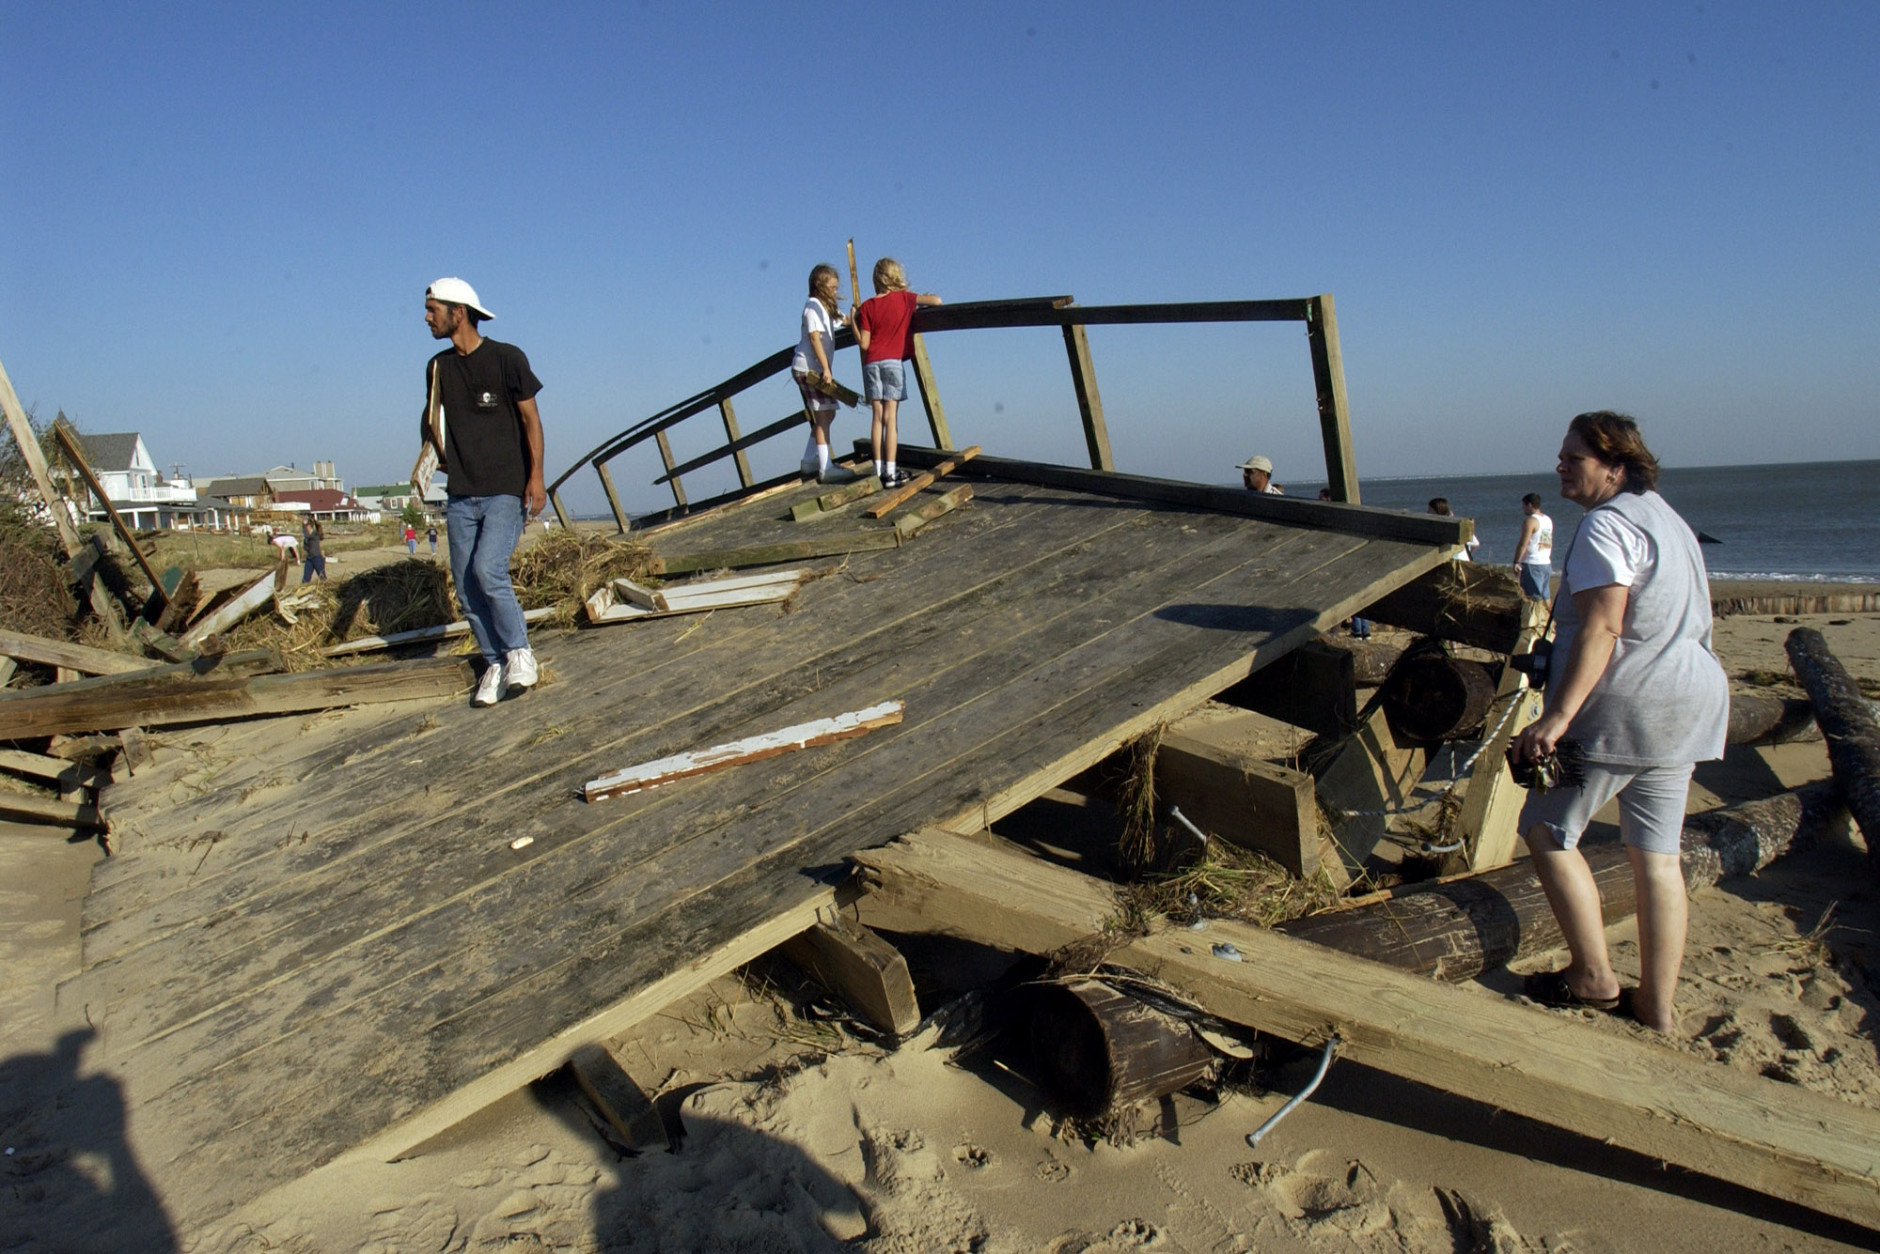 Local residents walk over a section of Harrison fishing pier that washed ashore on the beach in the Ocean View area of Norfolk, Va., Friday Sept. 19, 2003. The pier was built in the 1940's and was destroyed by Hurricane Isabel.  The storm battered the area leaving over 3.5 million people without power.   (AP Photo/Steve Helber)